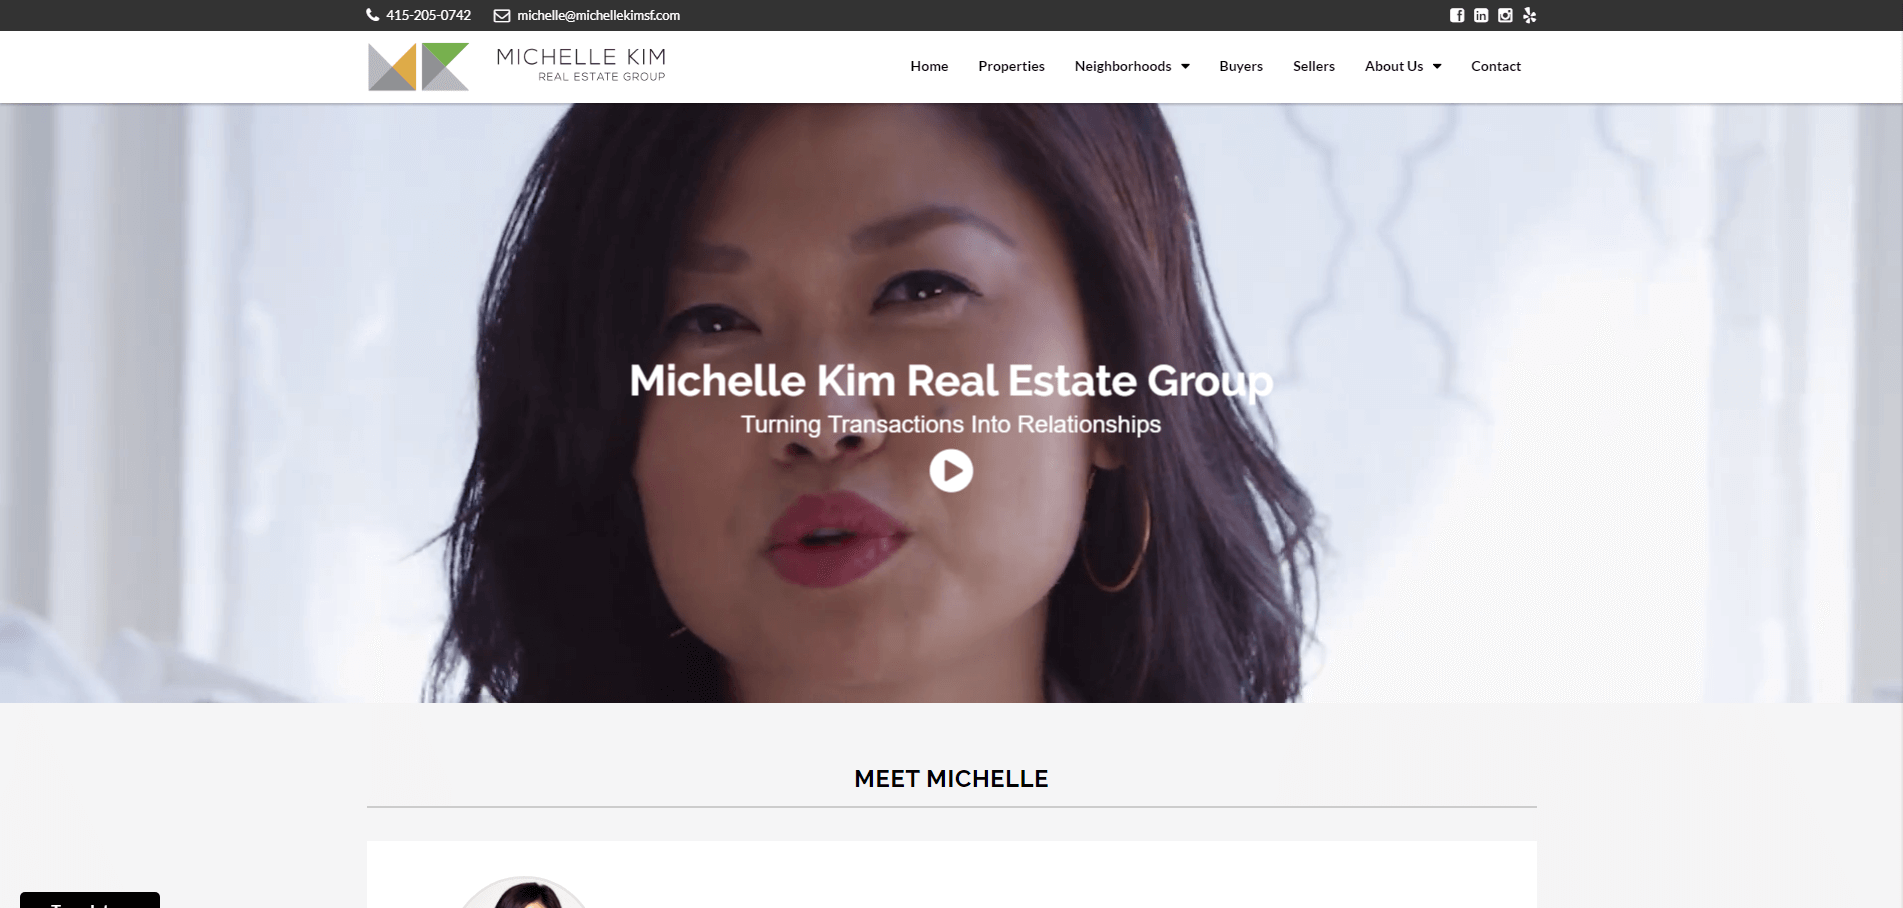  Incredible!  We made a list of the 101 best real estate websites.  We reviewed and ranked each site, 1-101.  Here's michellekimsf.com.  Guess who made #1! 